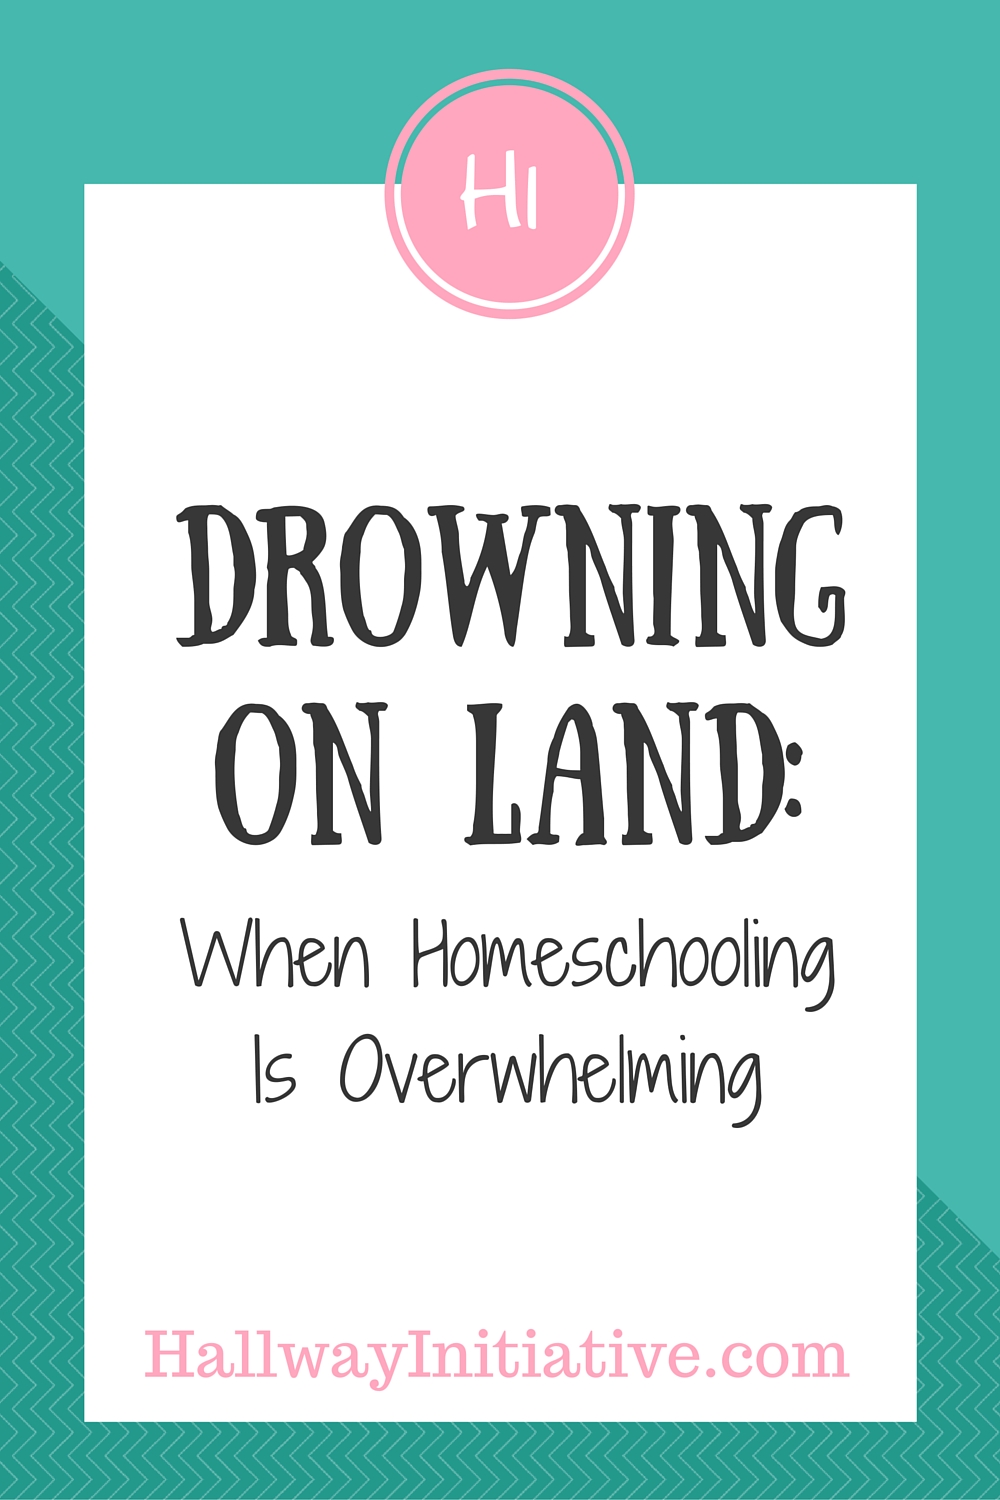 Drowning on land: when homeschooling is overwhelming